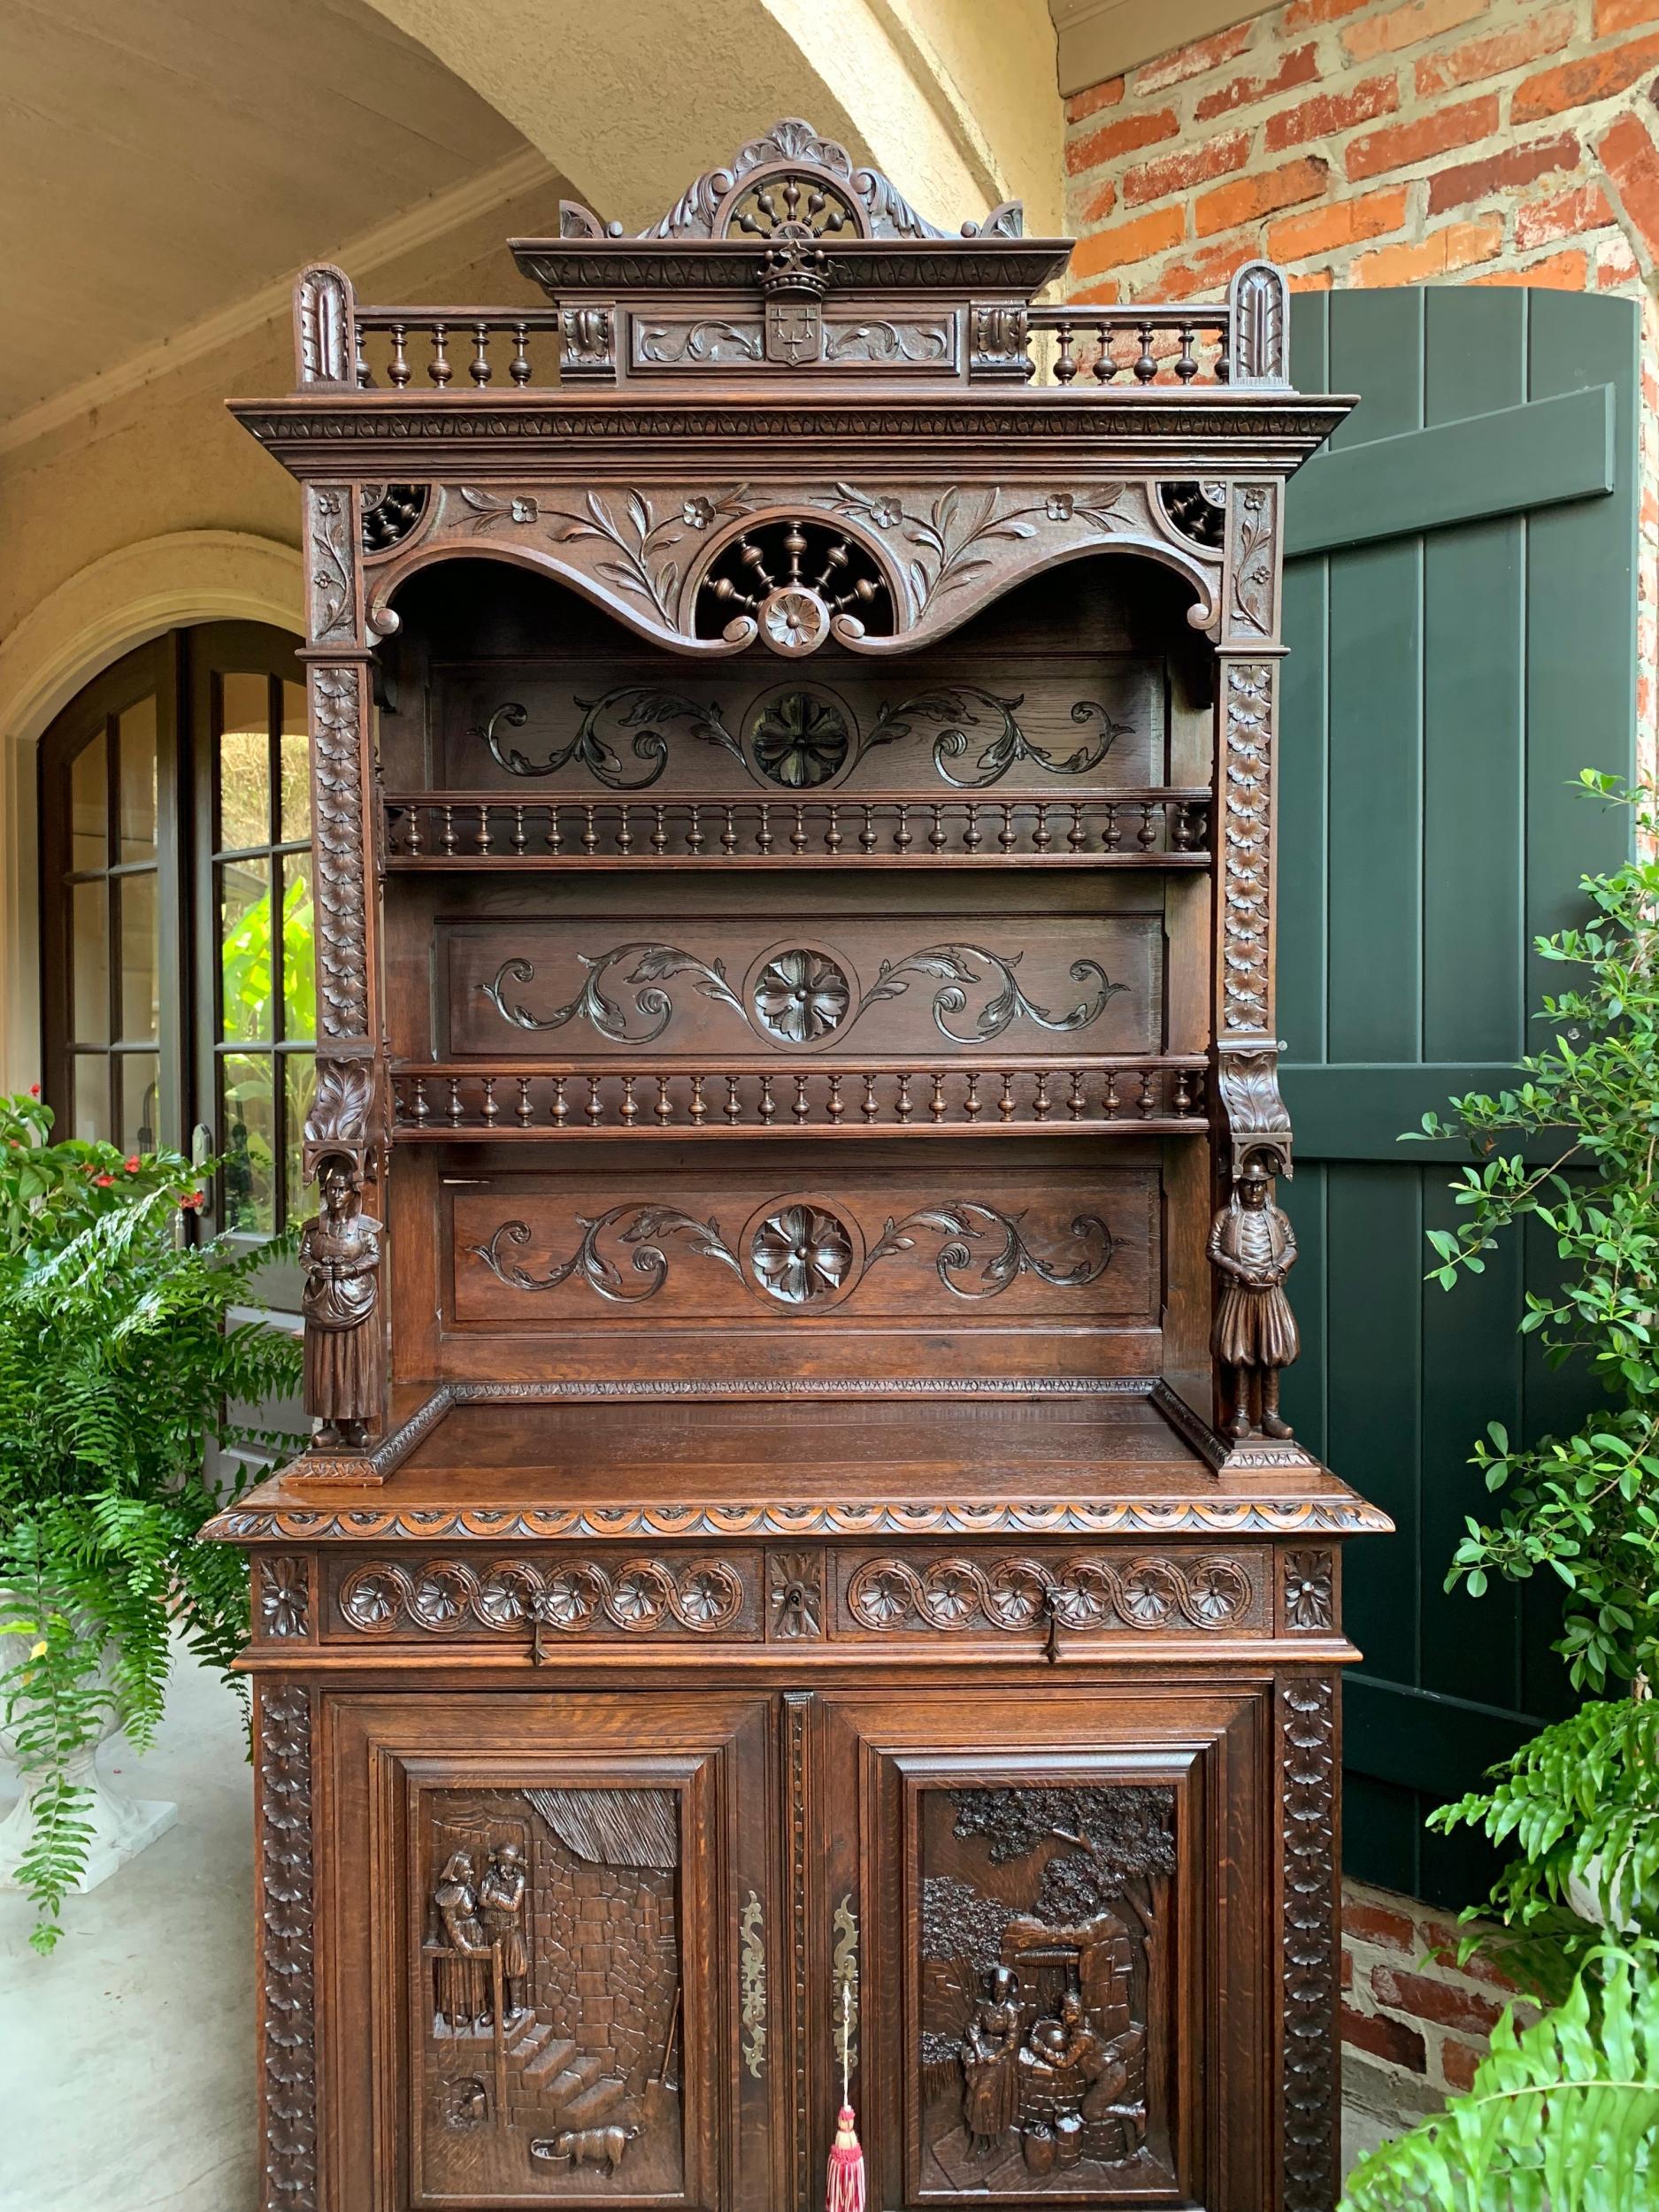 Antique French carved oak sideboard cabinet bookcase Breton Brittany

~Direct from France~
~Ornate 19th century French sideboard/cabinet with stunning Brittany carvings throughout~
~High crown features center arch of Breton “ship’s wheel” spindles